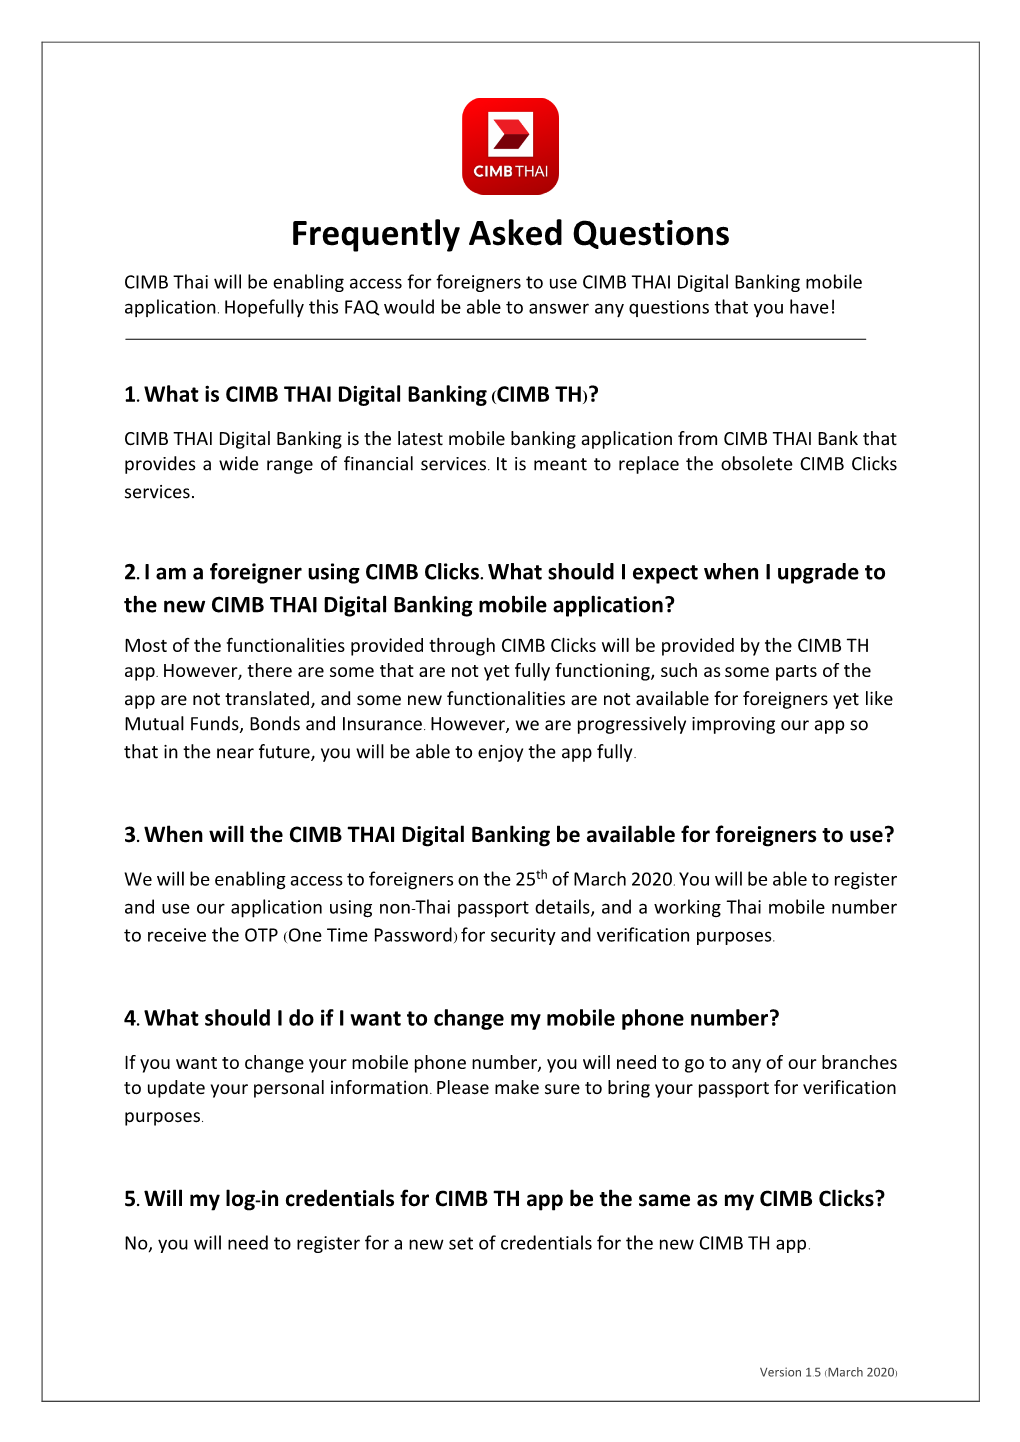 Frequently Asked Questions CIMB Thai Will Be Enabling Access for Foreigners to Use CIMB THAI Digital Banking Mobile Application